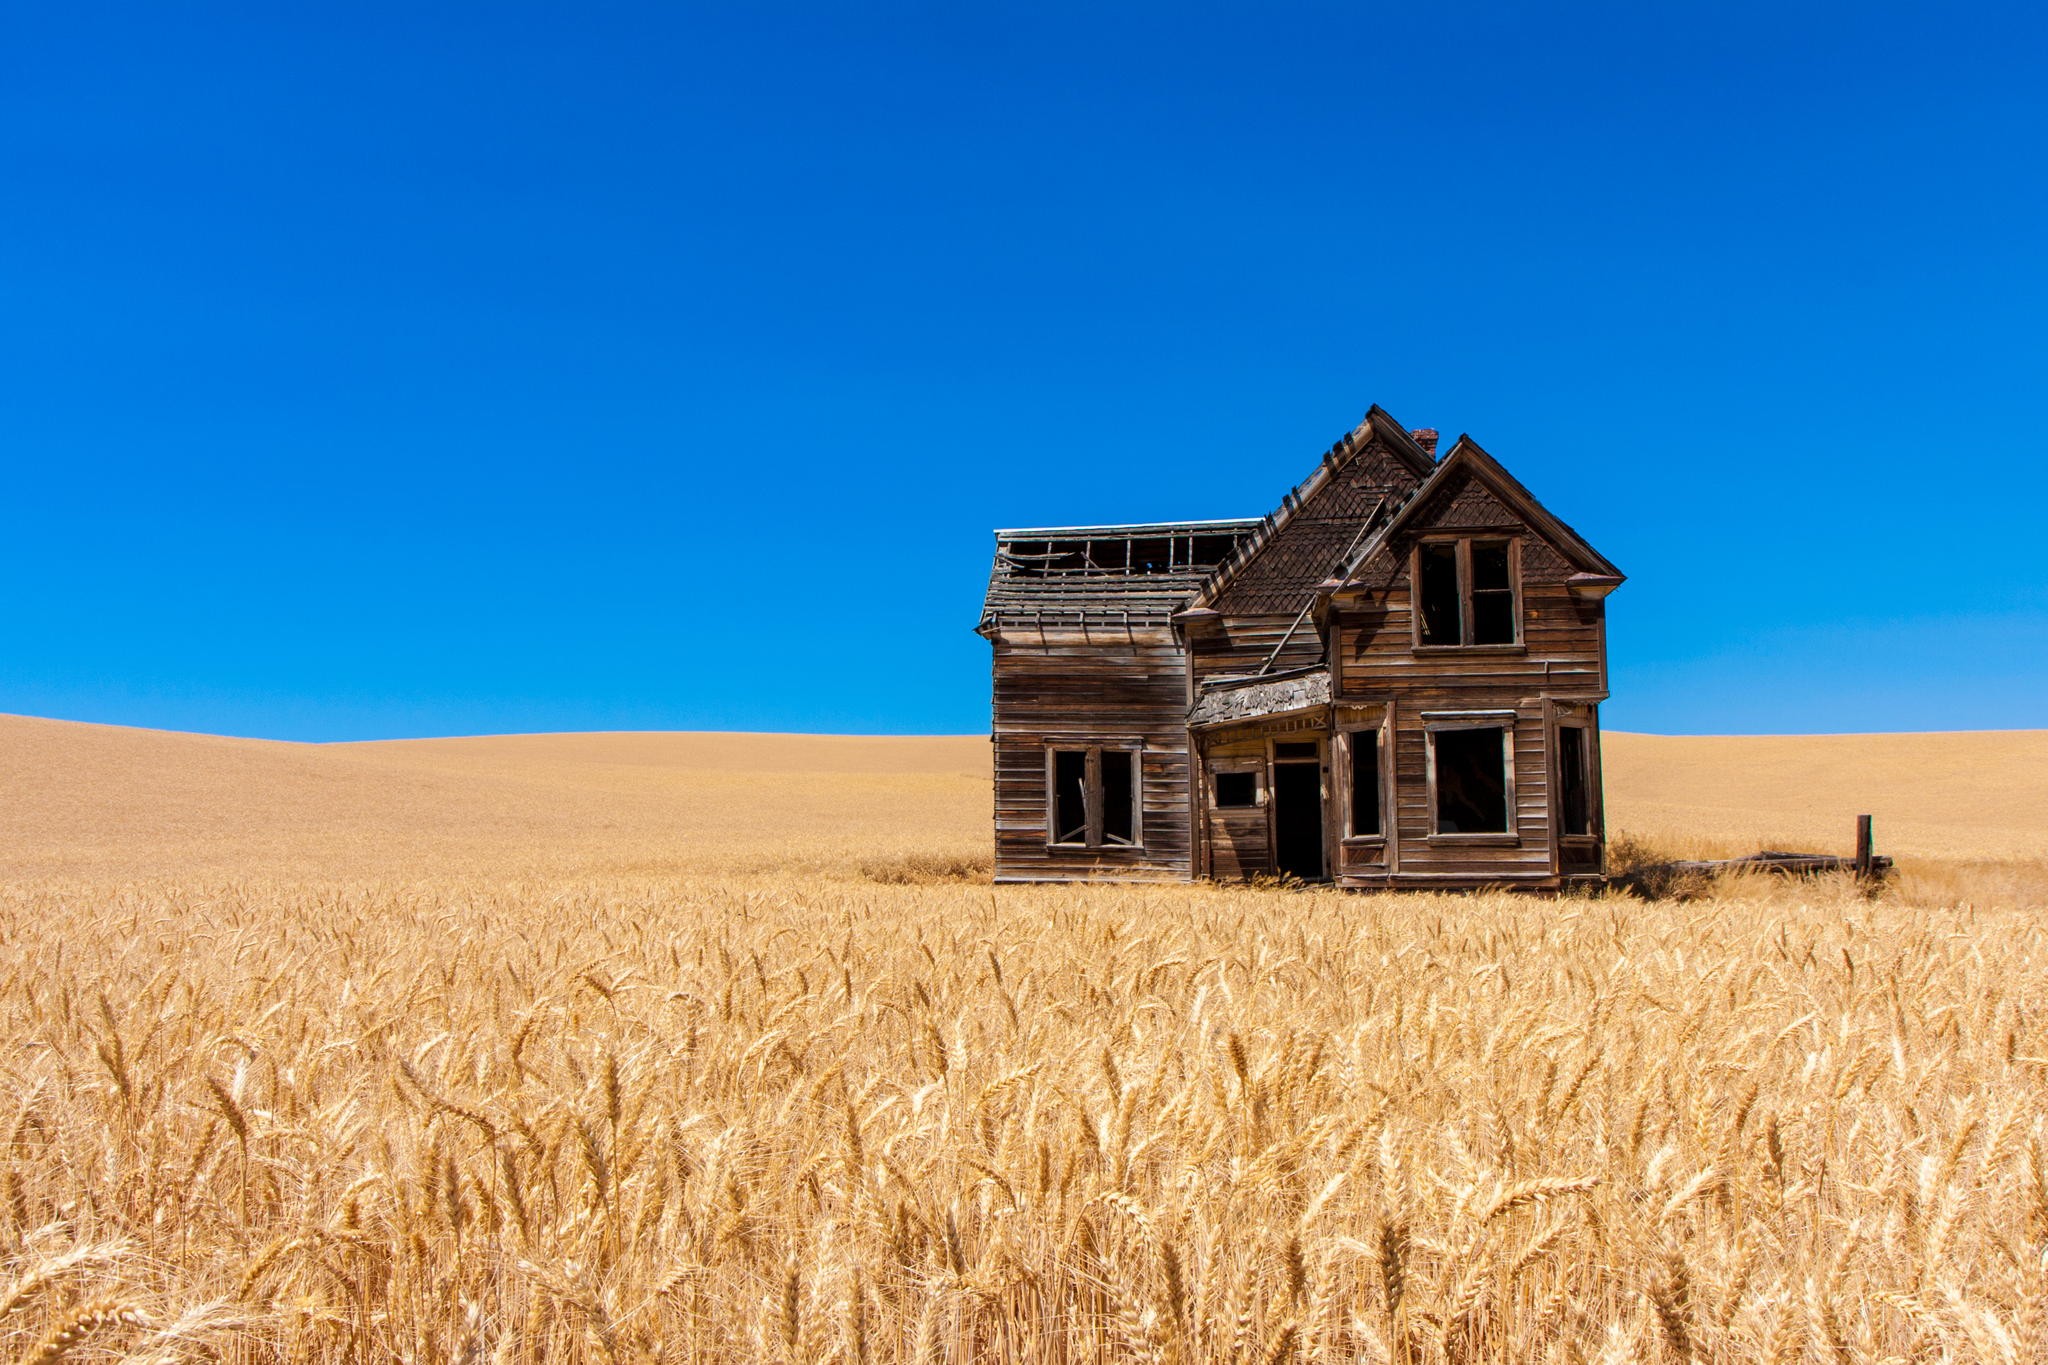 General 2048x1365 landscape wheat plants photo manipulation photography old building abandoned house sky sky blue blue crops yellow clear sky sunlight calm field Agro (Plants) ruins